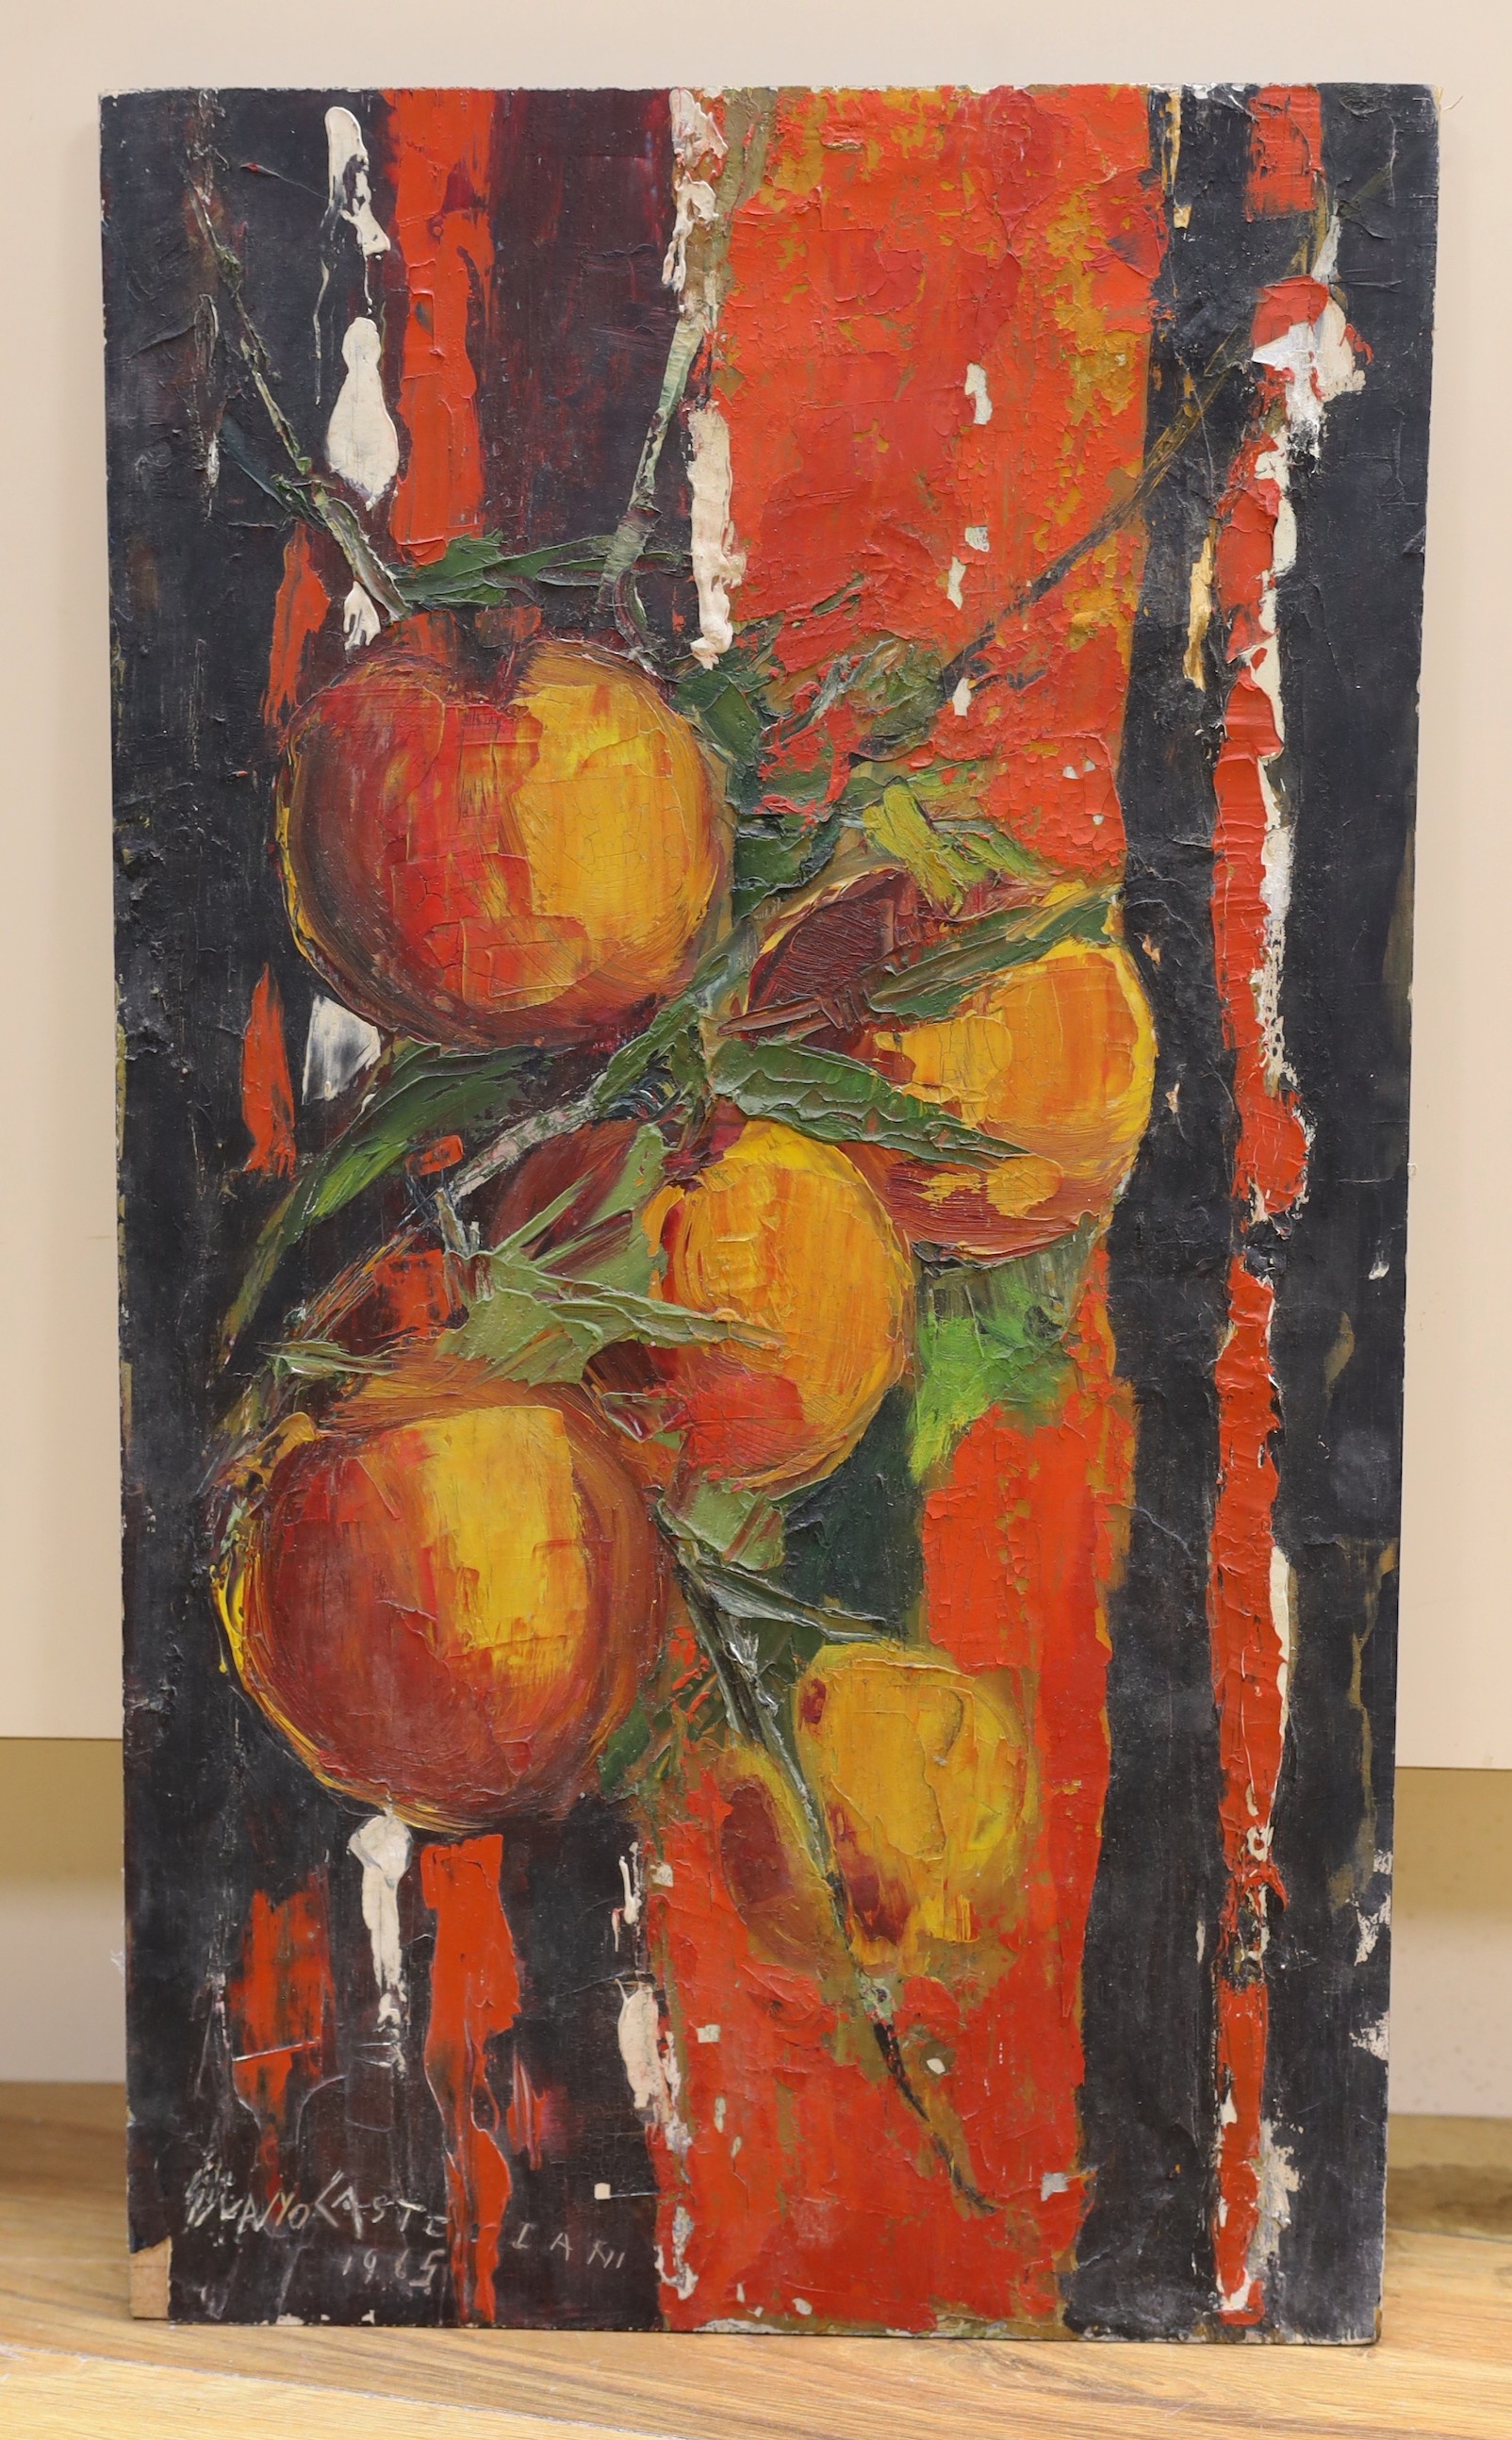 Givano Castellani, oil on wooden panel, Study of oranges, signed and dated 1965, 59 x 34cm